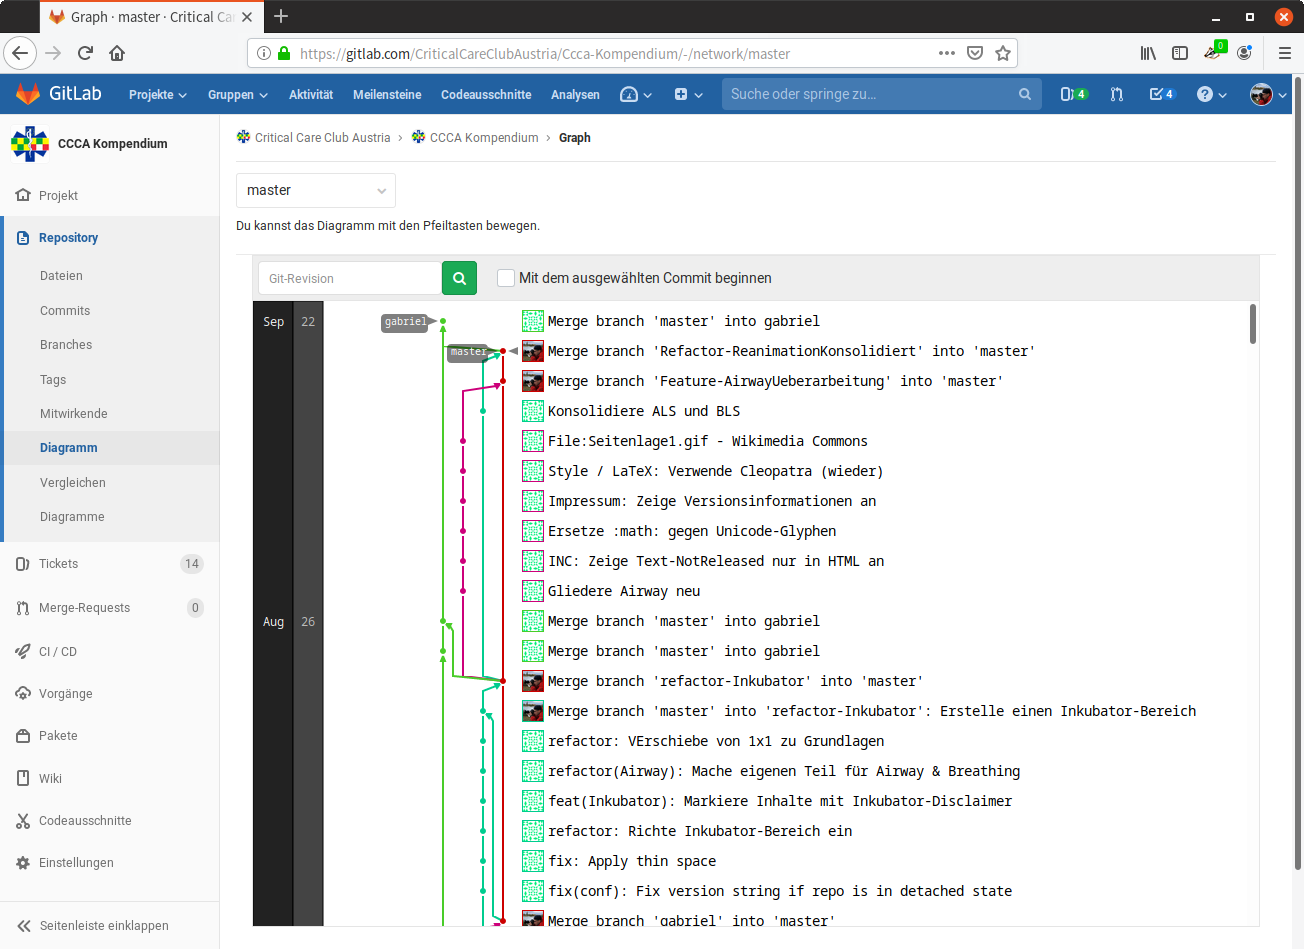 ../../_images/GitLab-Project-Repository-Diagramm.png